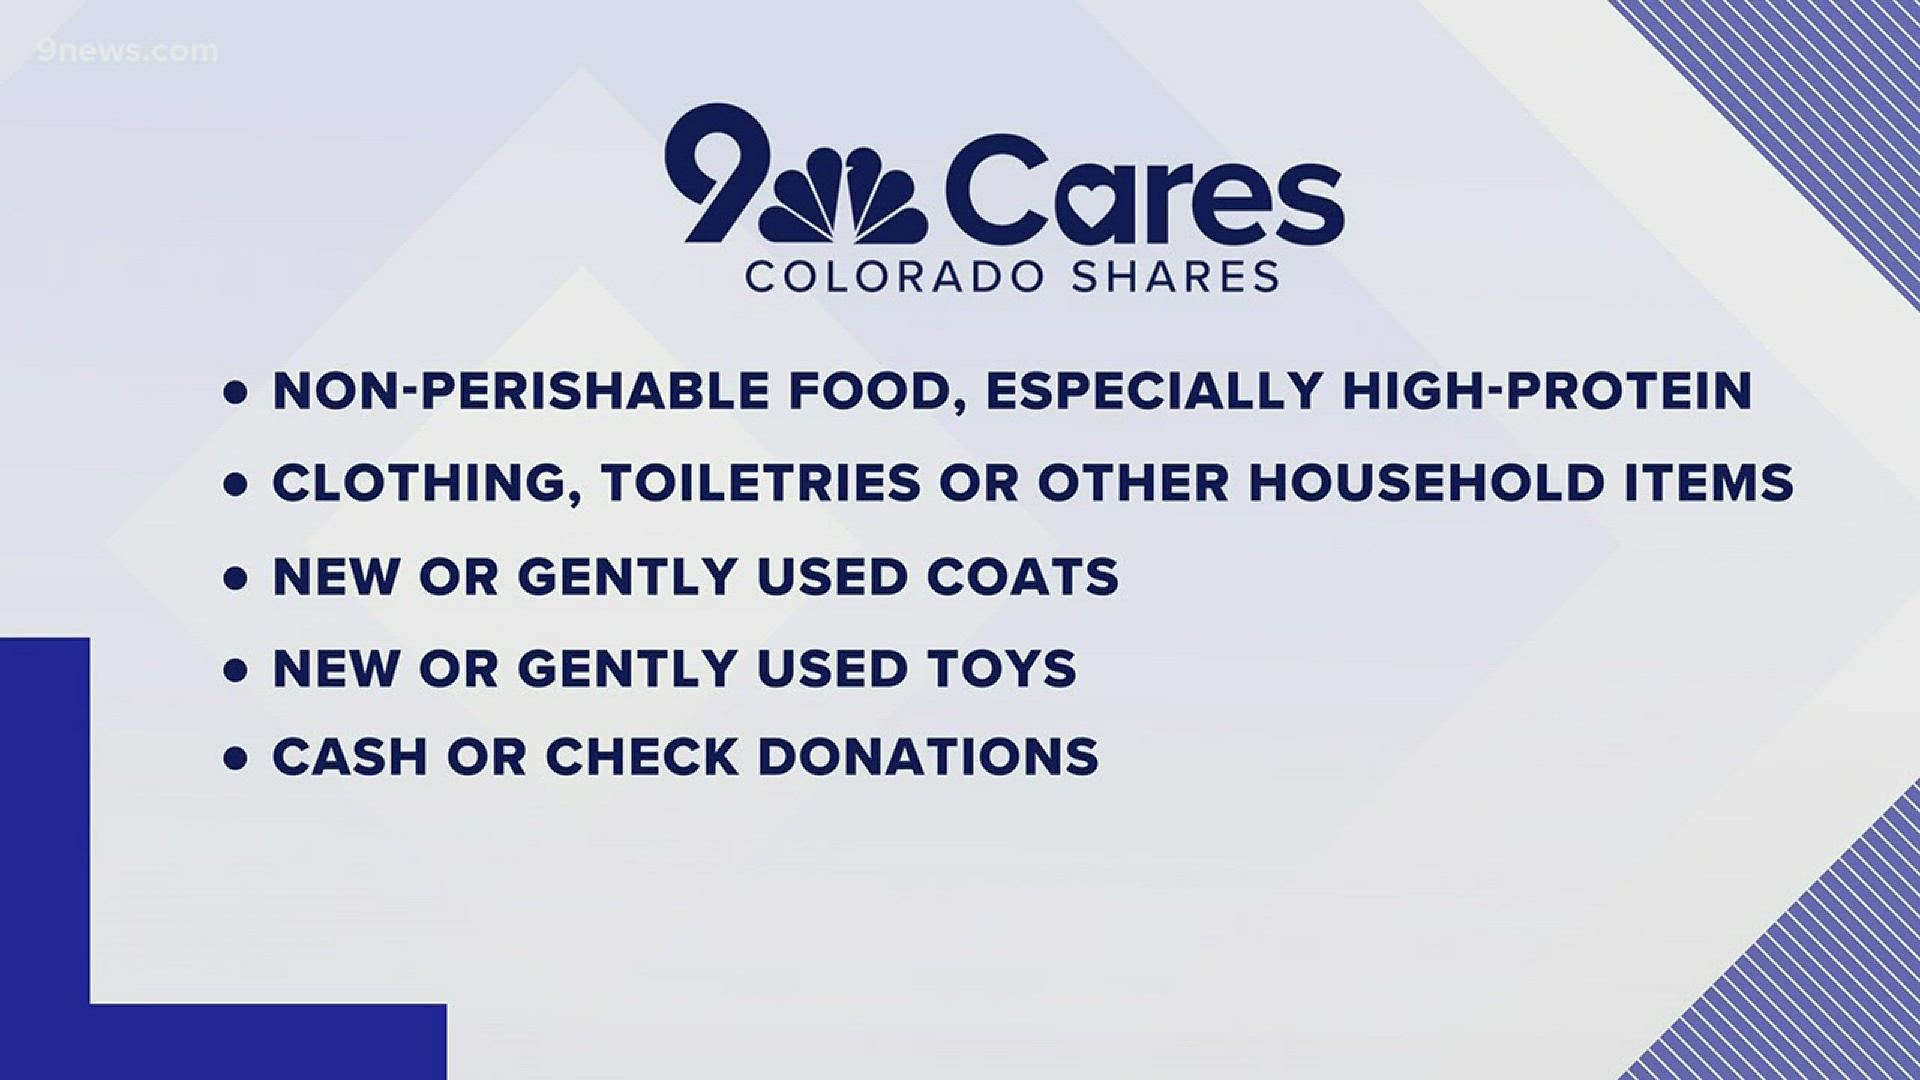 For the last 37 years, Coloradans have helped each other stay warm through the winter by donating to the Coats for Colorado drive. Here to talk more about the program is Dependable Cleaners president Steven Toltz.